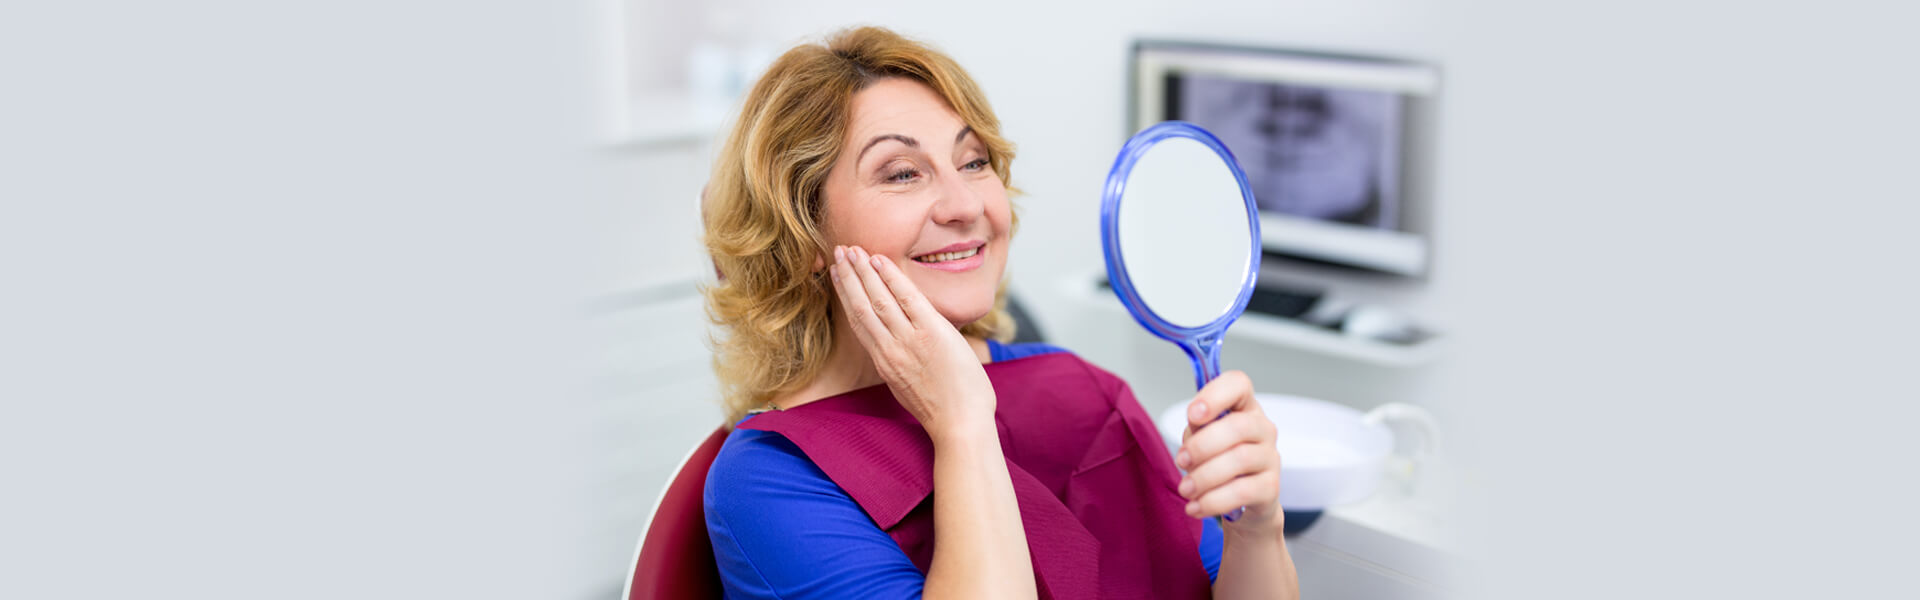 Think Your Smile Is a Detractor: Why Not Learn about the Benefits of a Smile Makeover?